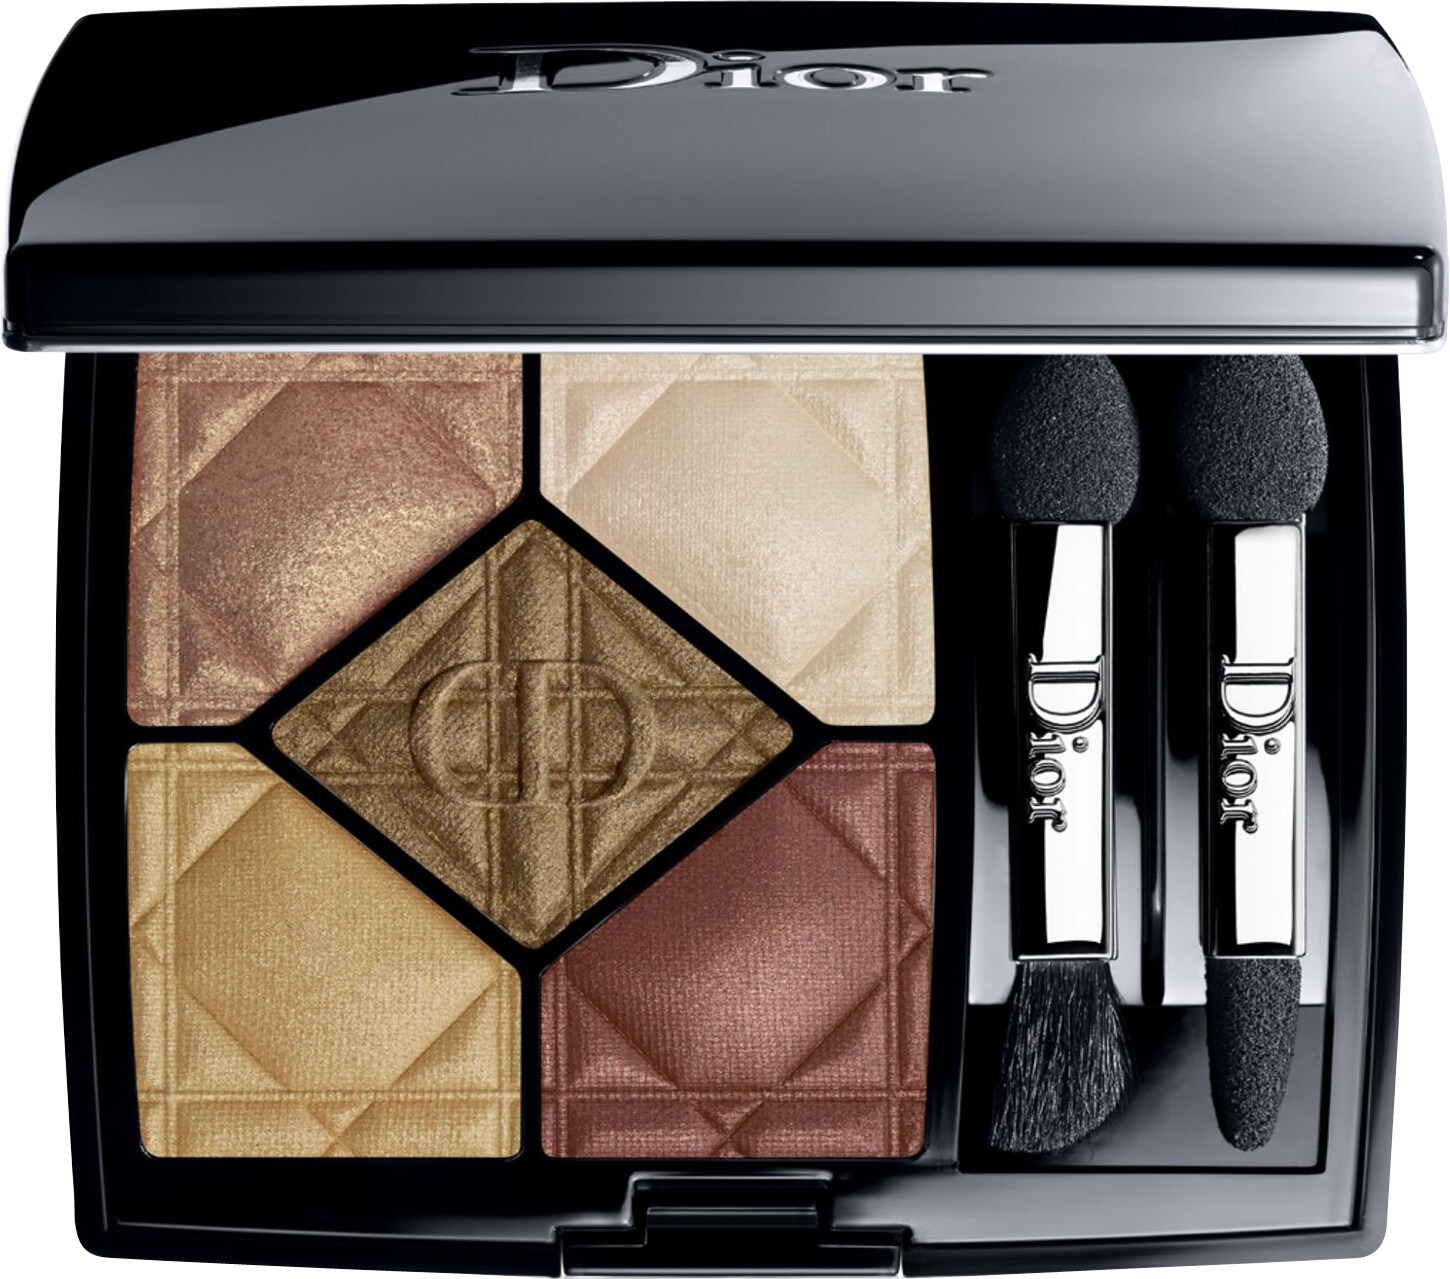 DIOR 5 Couleurs Colours & Effects Eyeshadow Palette 7g 657 - Expose